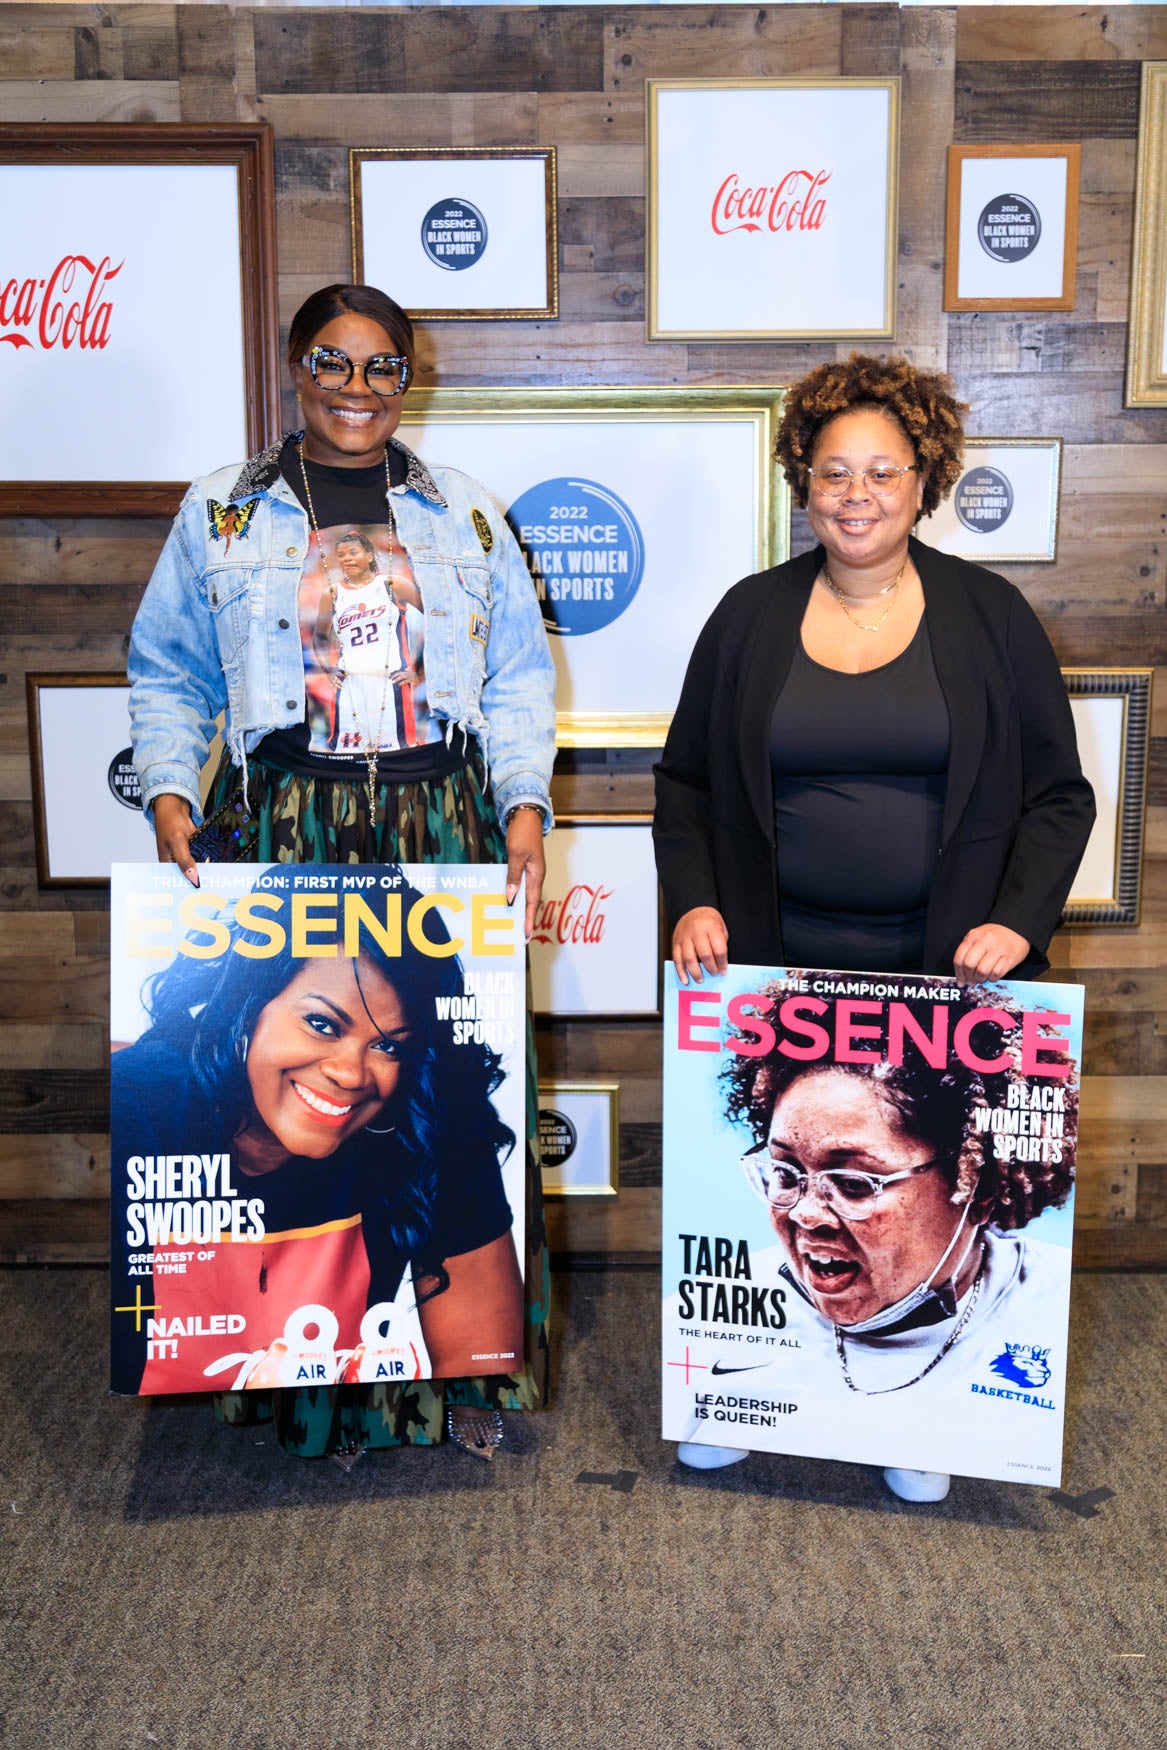 Basketball Legends Sheryl Swoopes And Tara Starks Score Big At Black Women In Sports Brunch